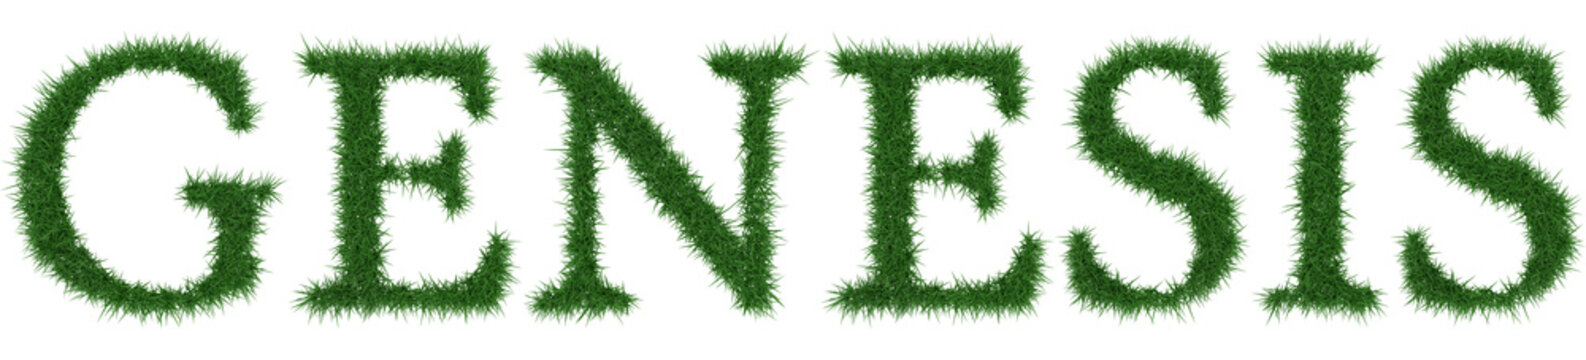 Genesis - 3D rendering fresh Grass letters isolated on whhite background.